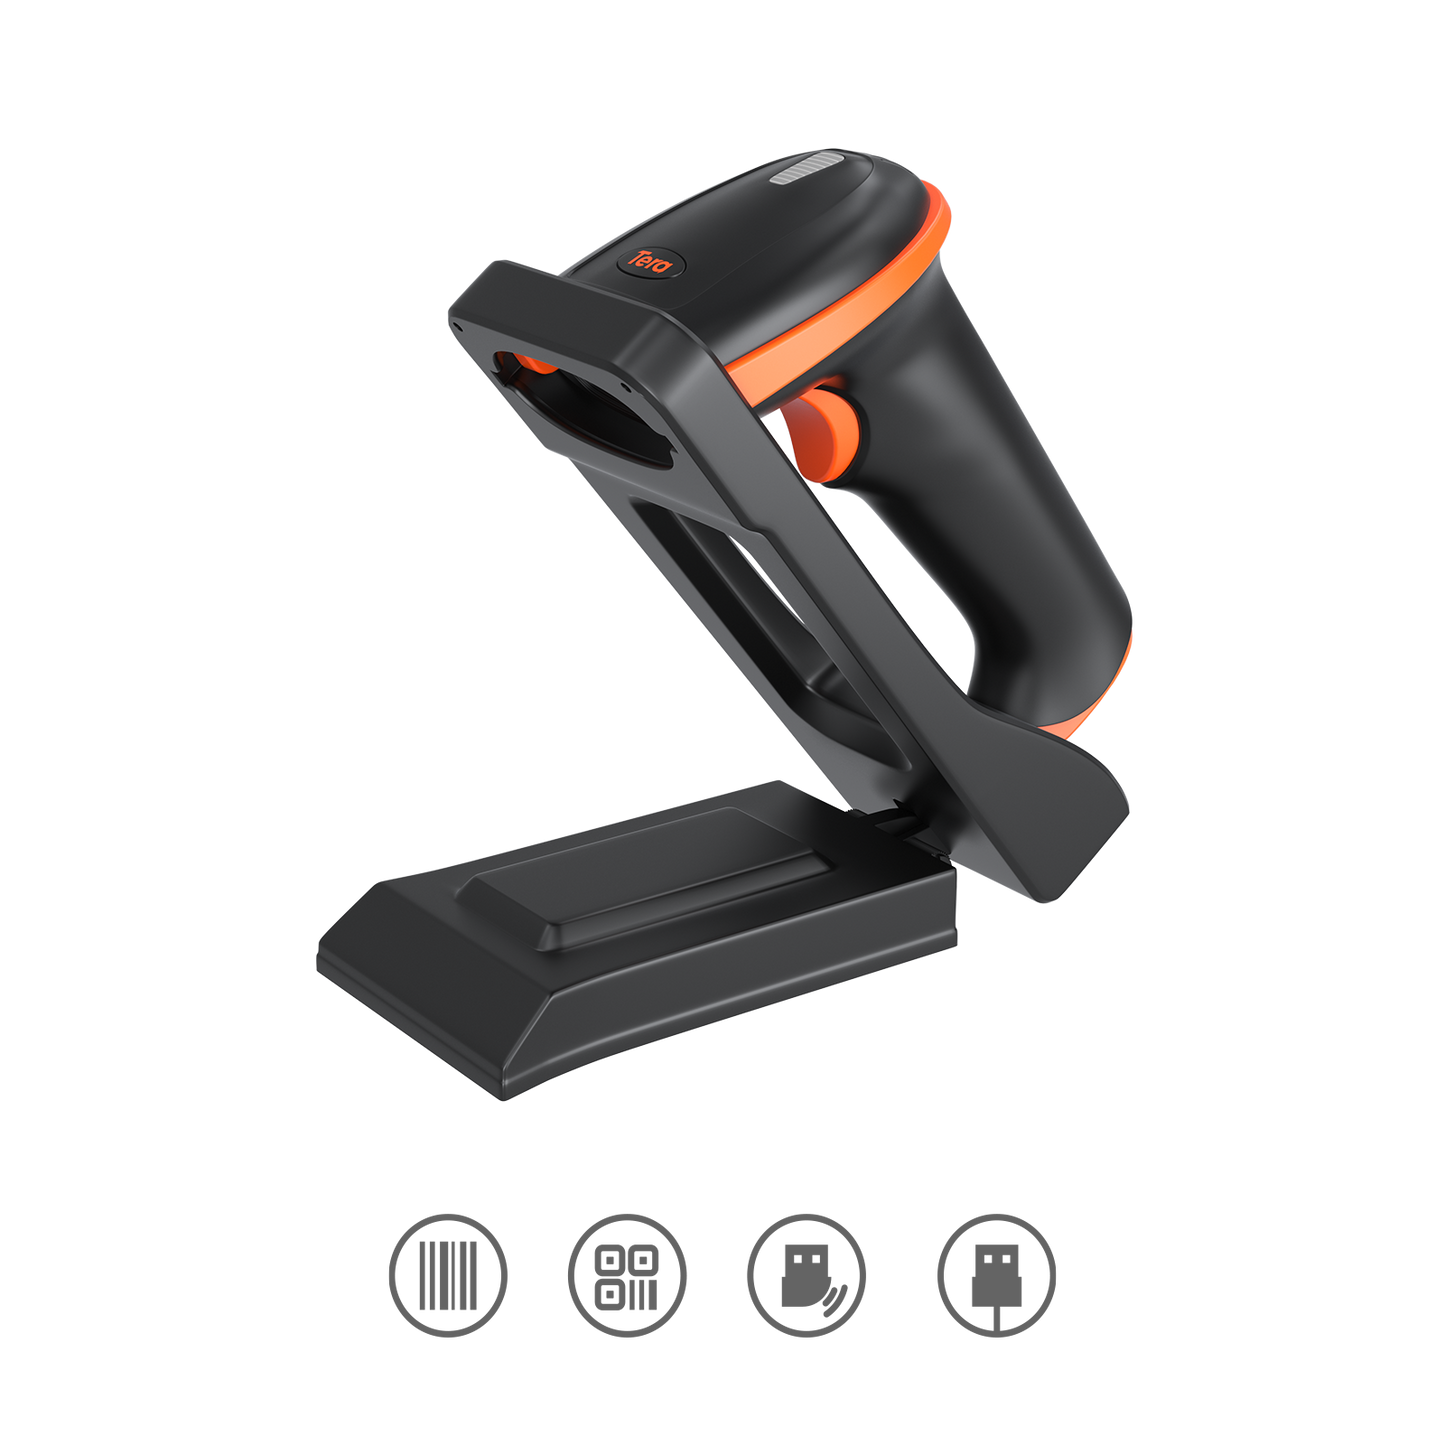 tera-d5100-charging-cradle-2d-wireless-barcode-scanner-with-wall-mountable-cradle